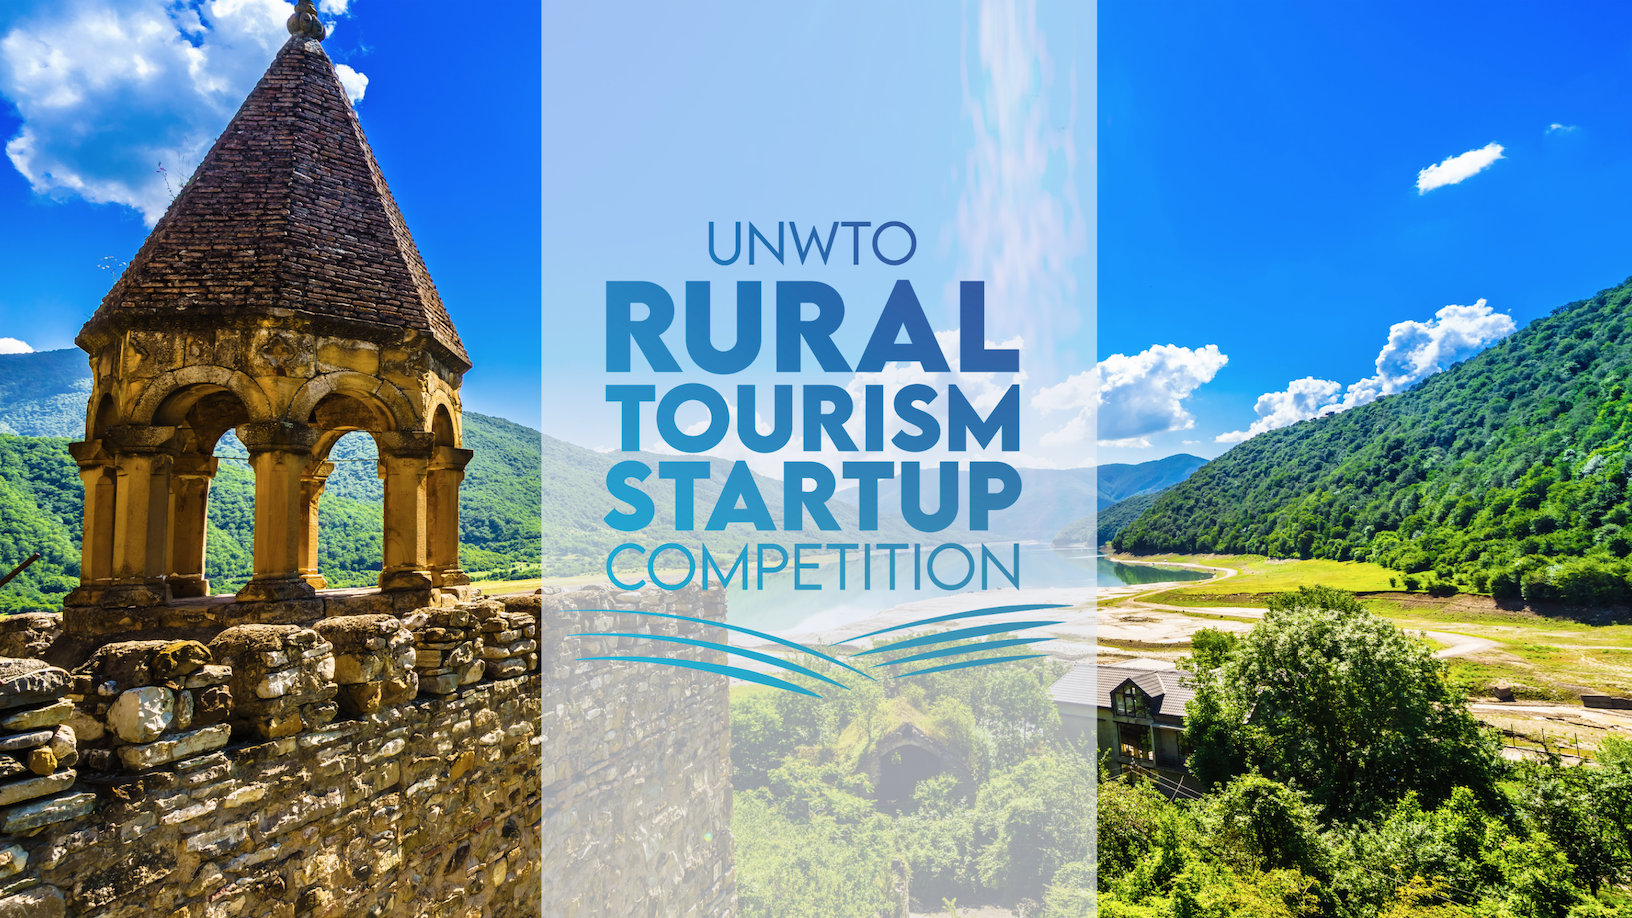 UNWTO Global Rural Tourism Startup Competition